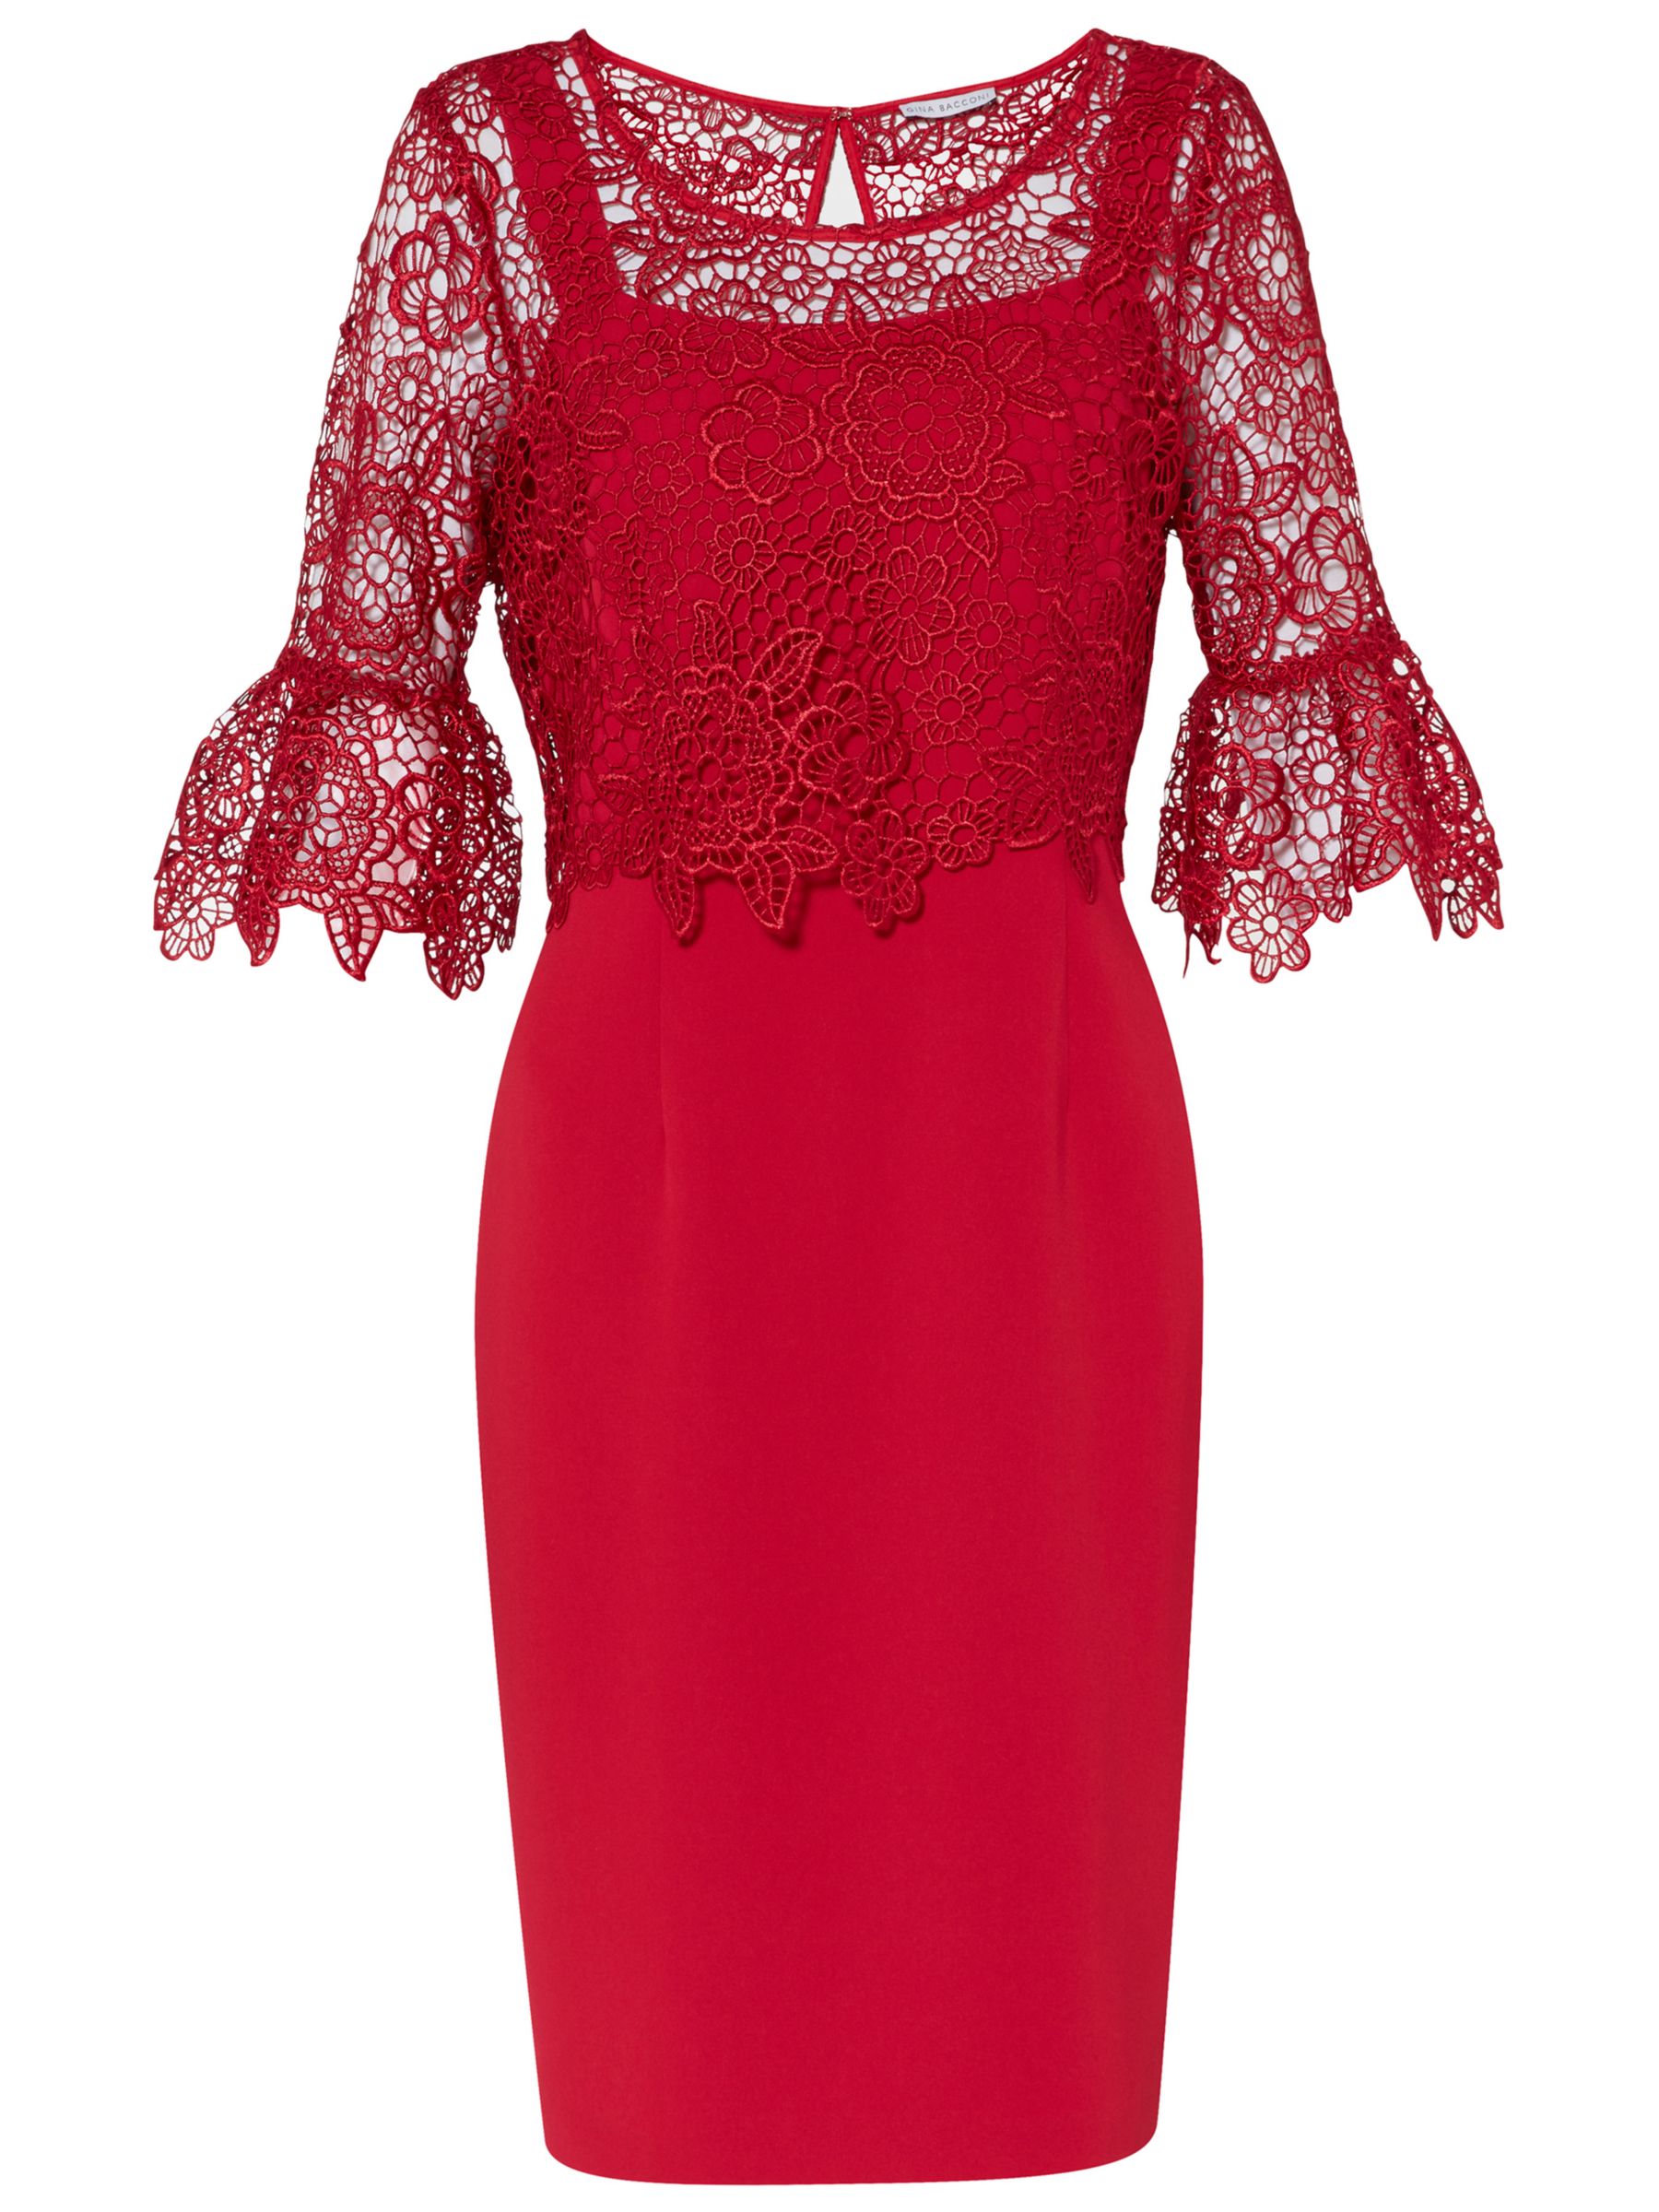 Gina Bacconi Rya Crepe Dress With Lace Overtop, Rose Red at John Lewis ...